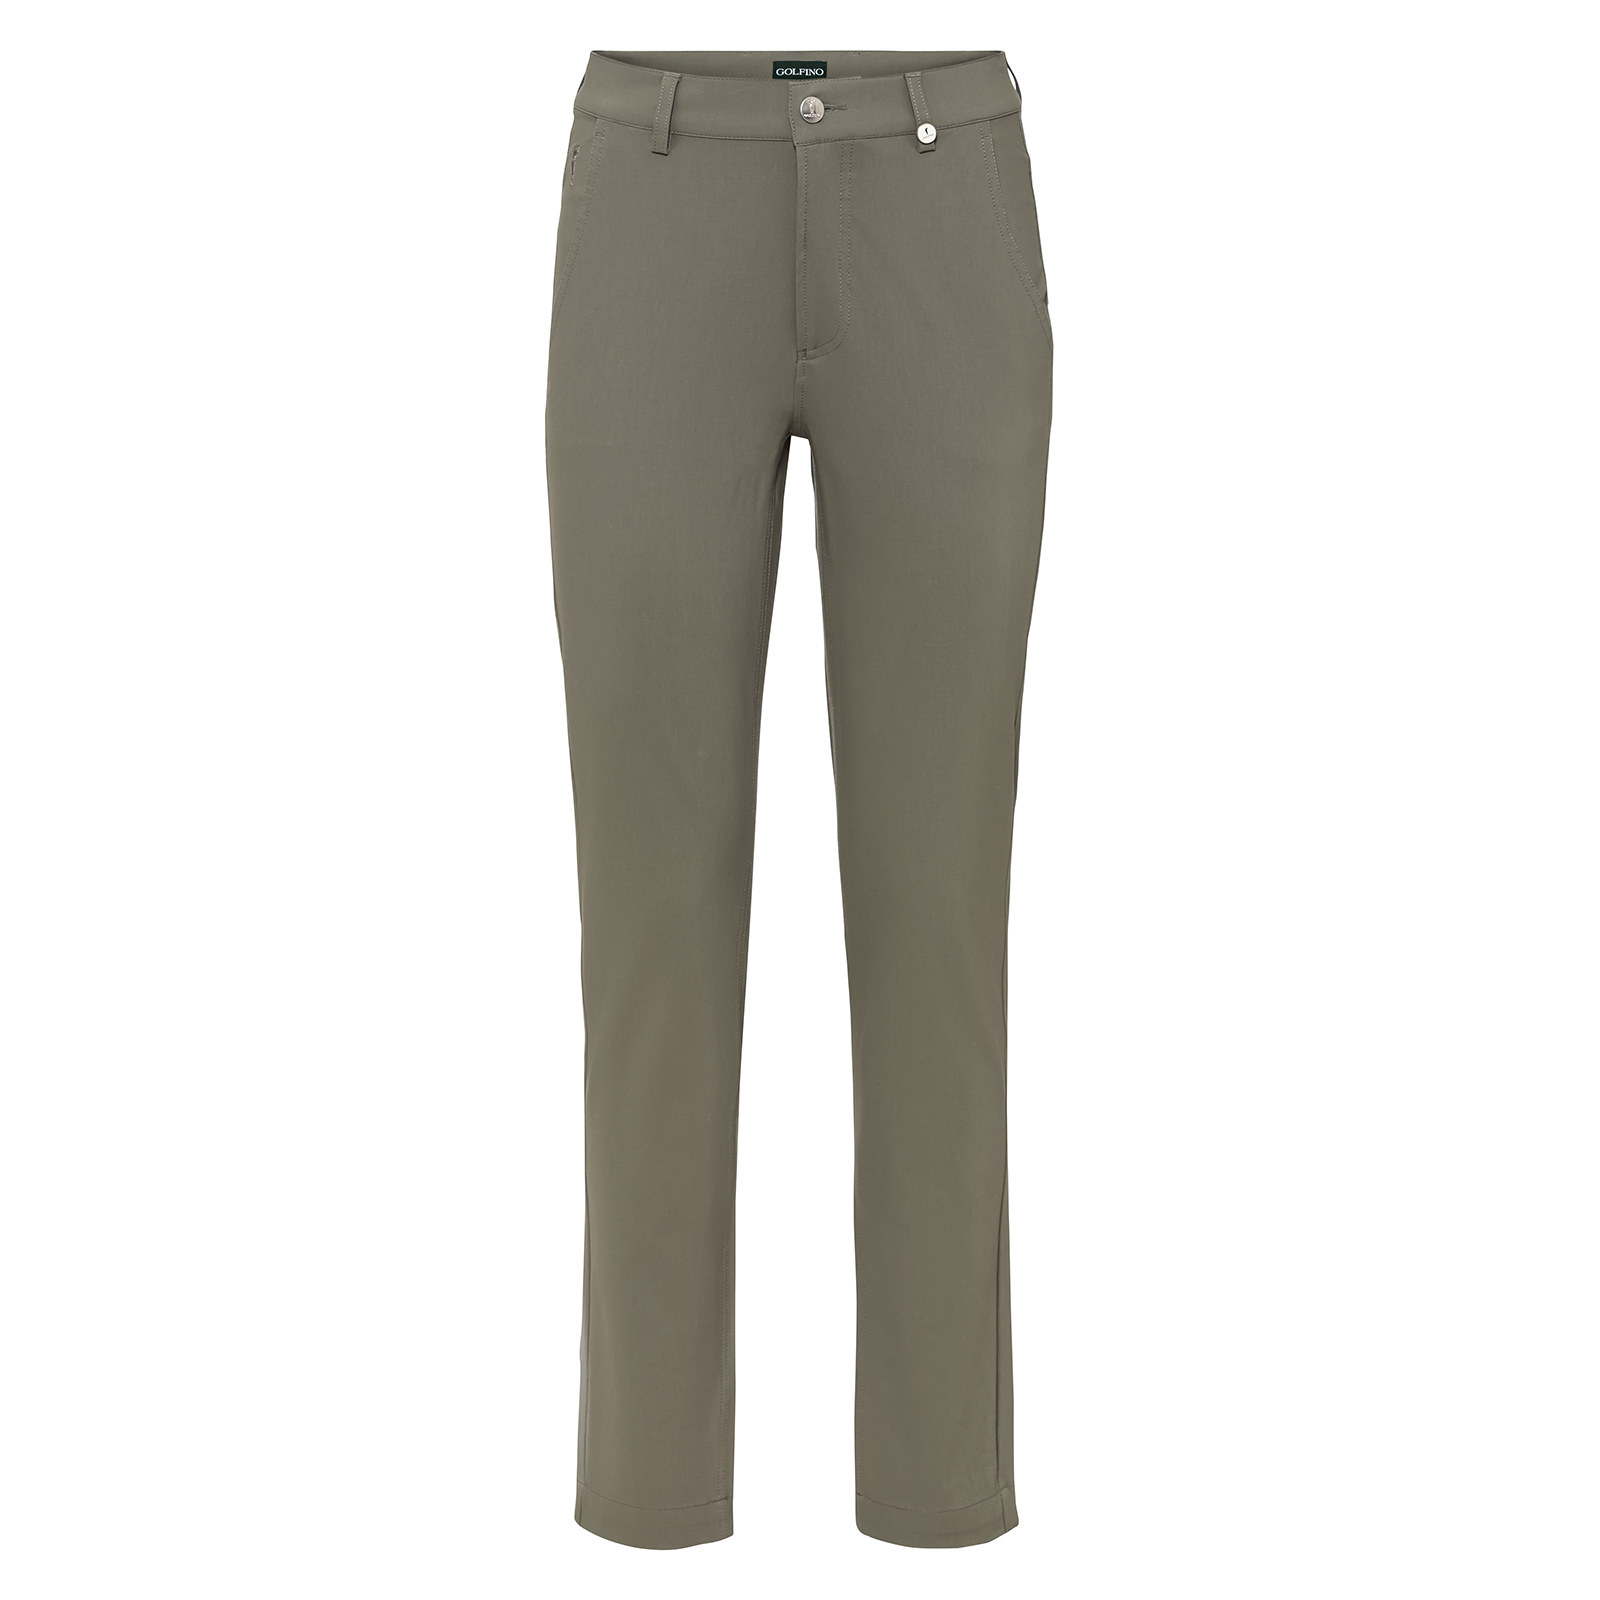 Comfortably wearable ladies’ golf trousers in premium Techno Stretch 